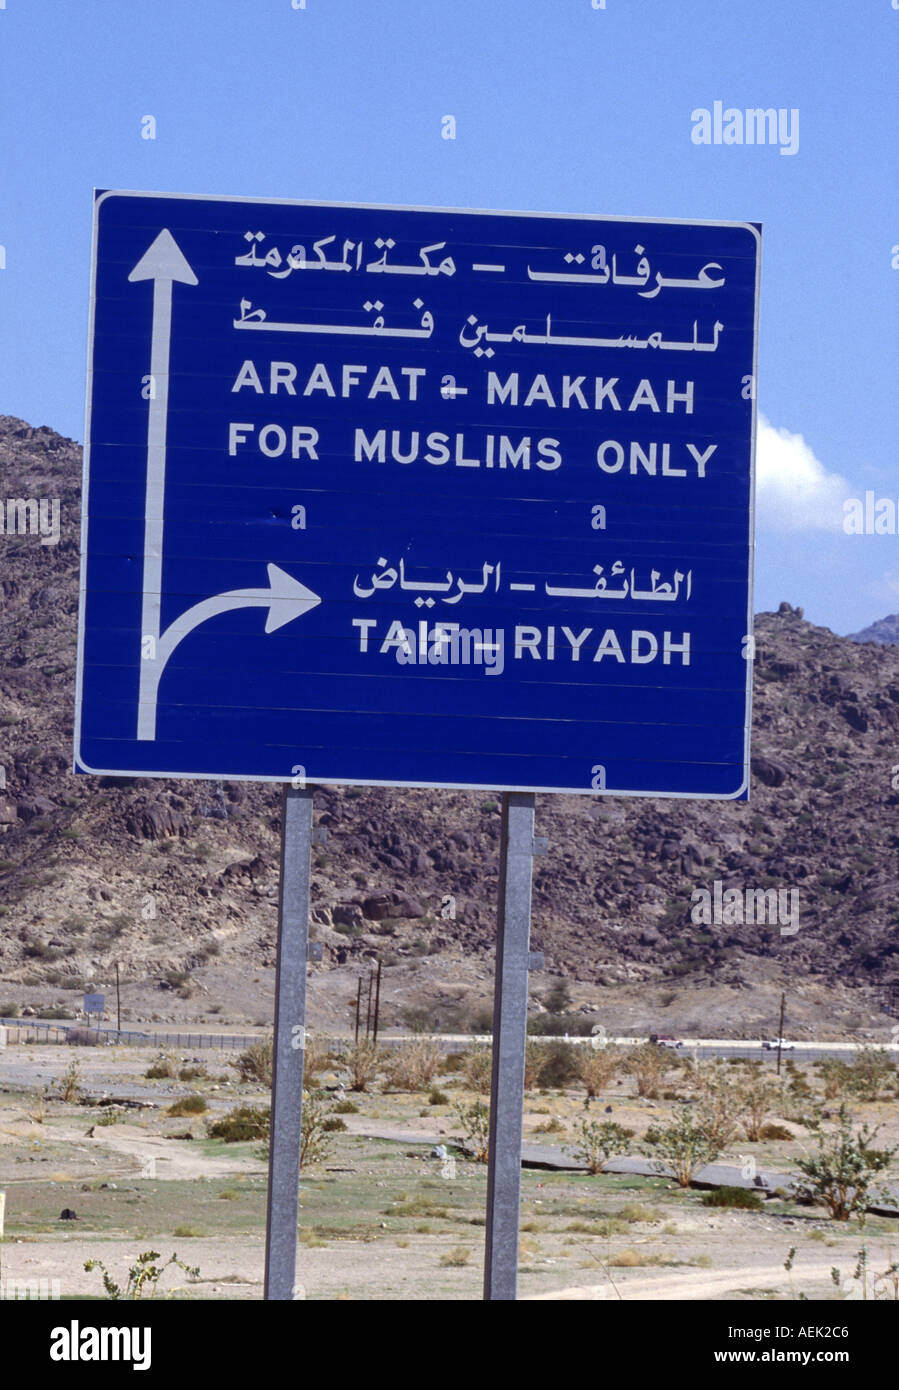 non-muslim-road-junction-to-the-holy-sites-mecca-and-medina-in-saudi-AEK2C6.jpg